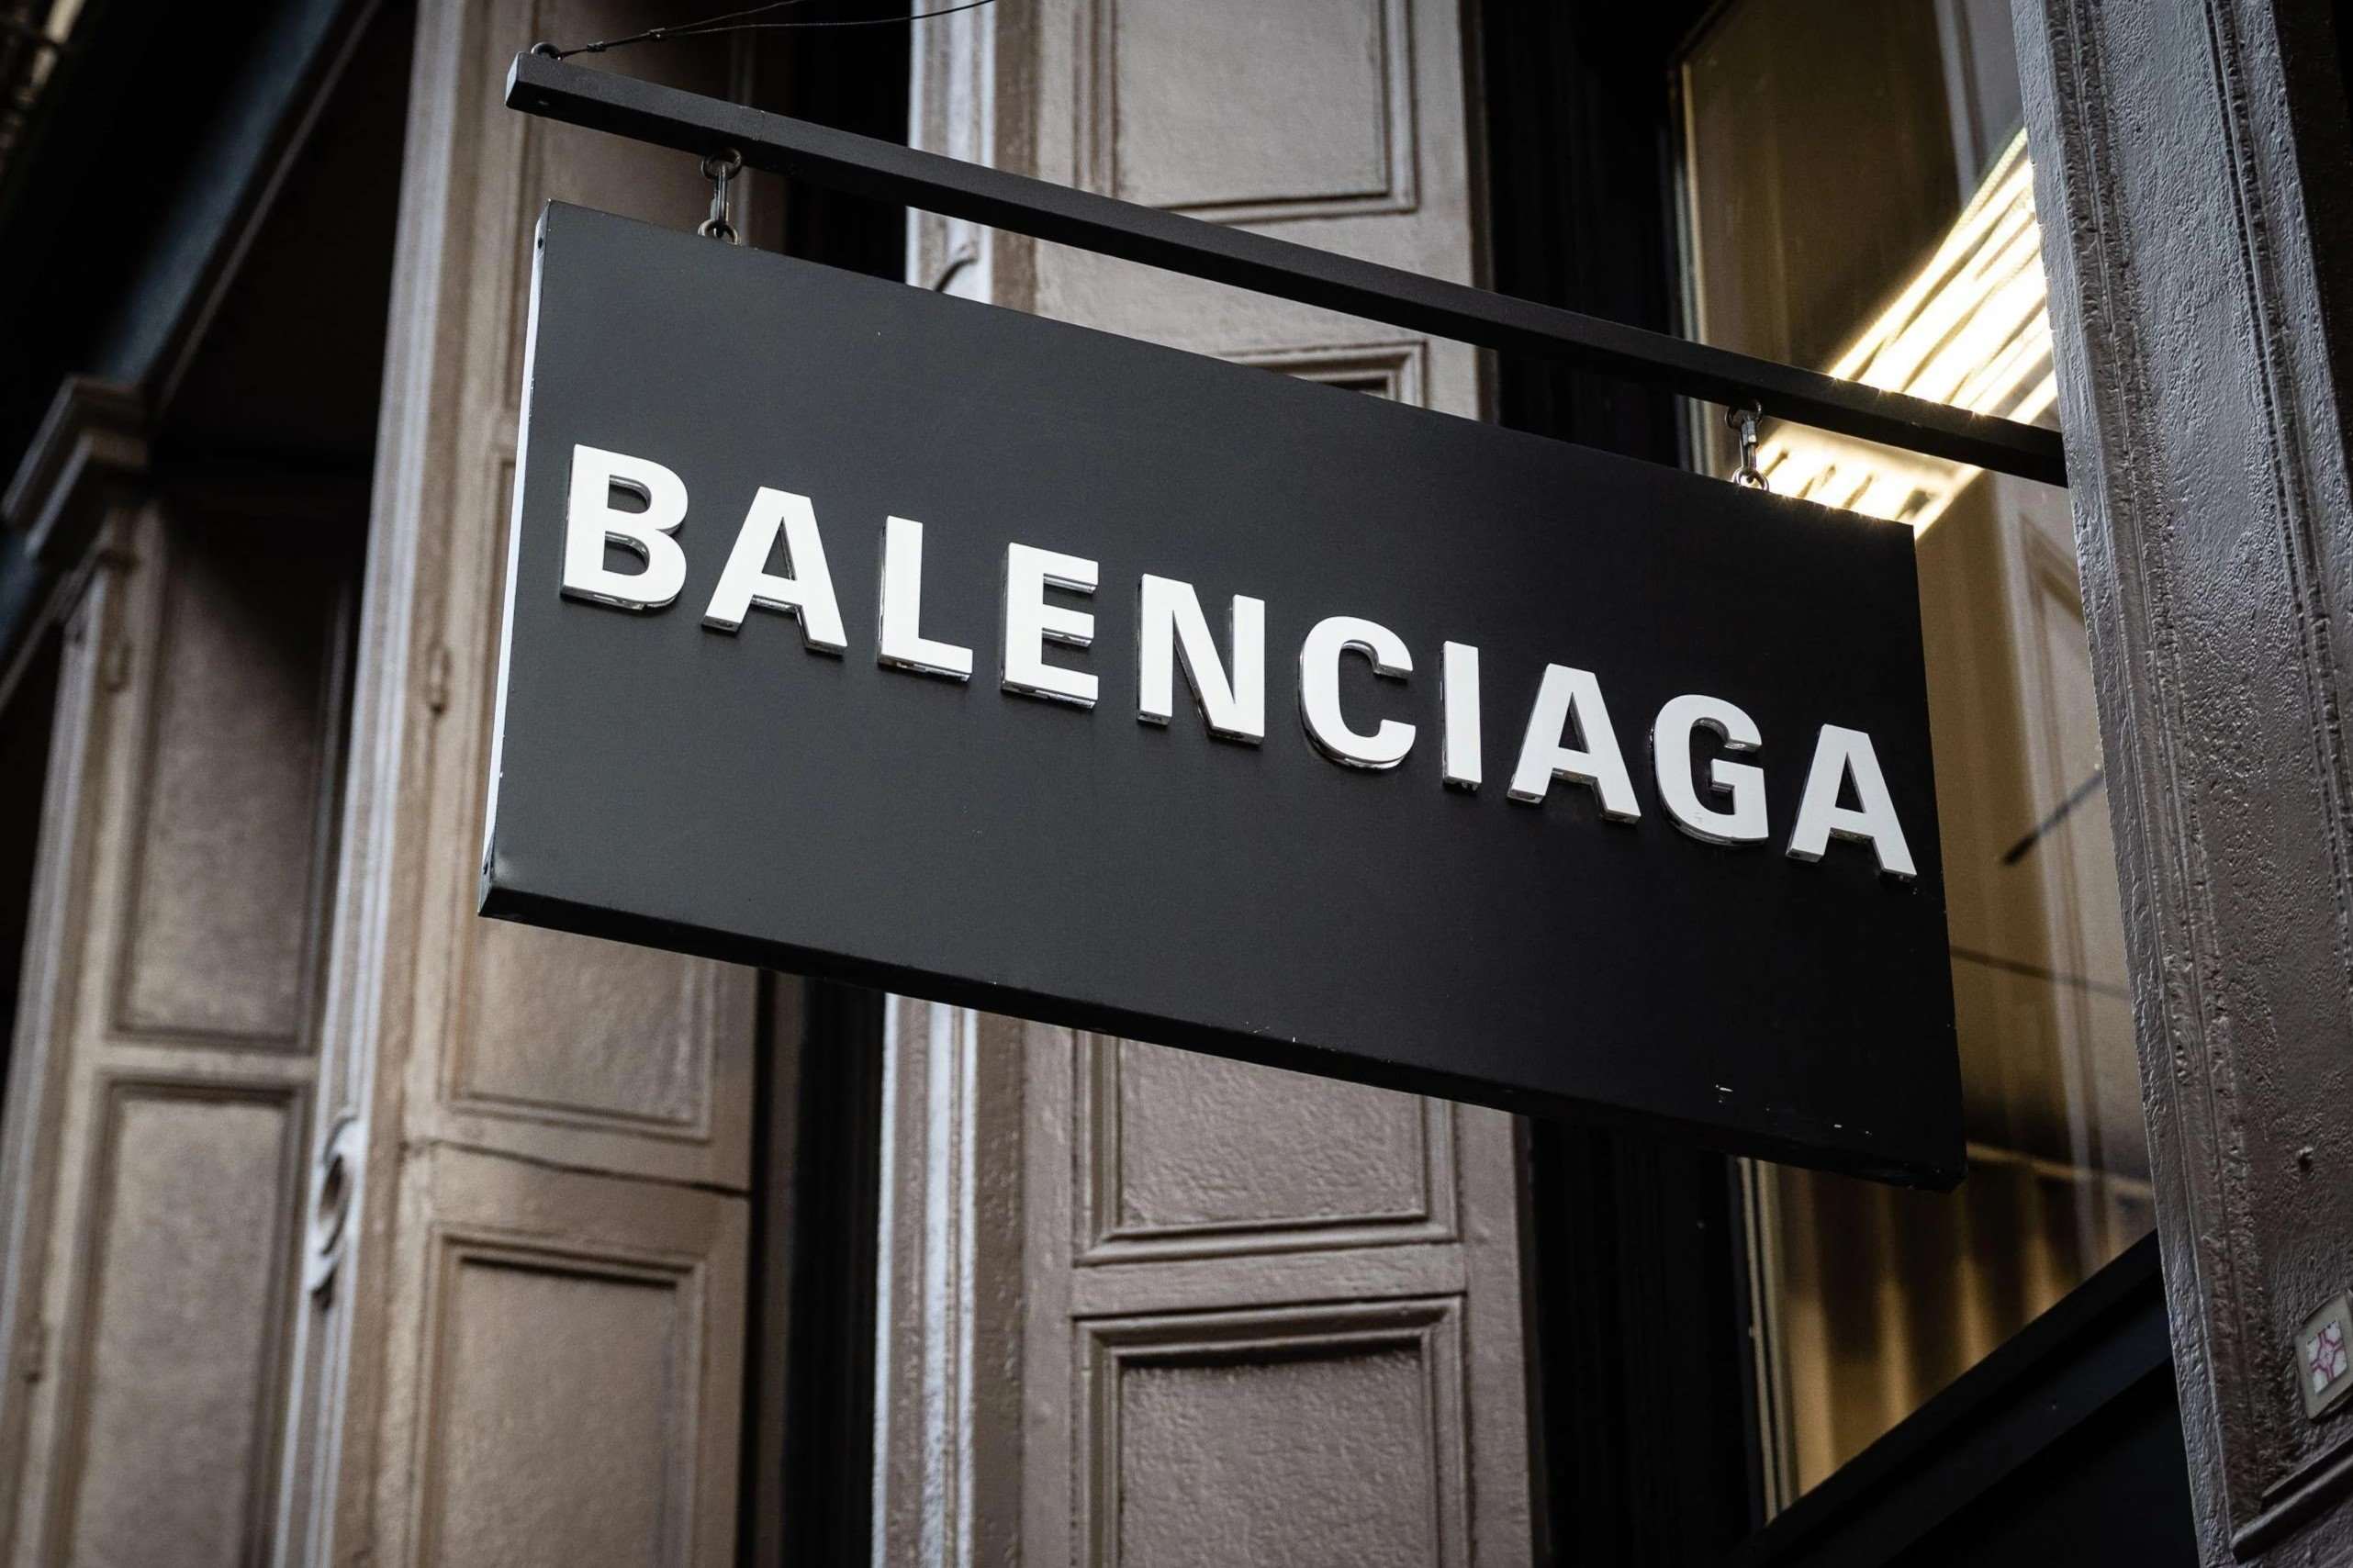 The Hidden Meaning Behind Balenciaga Revealed!